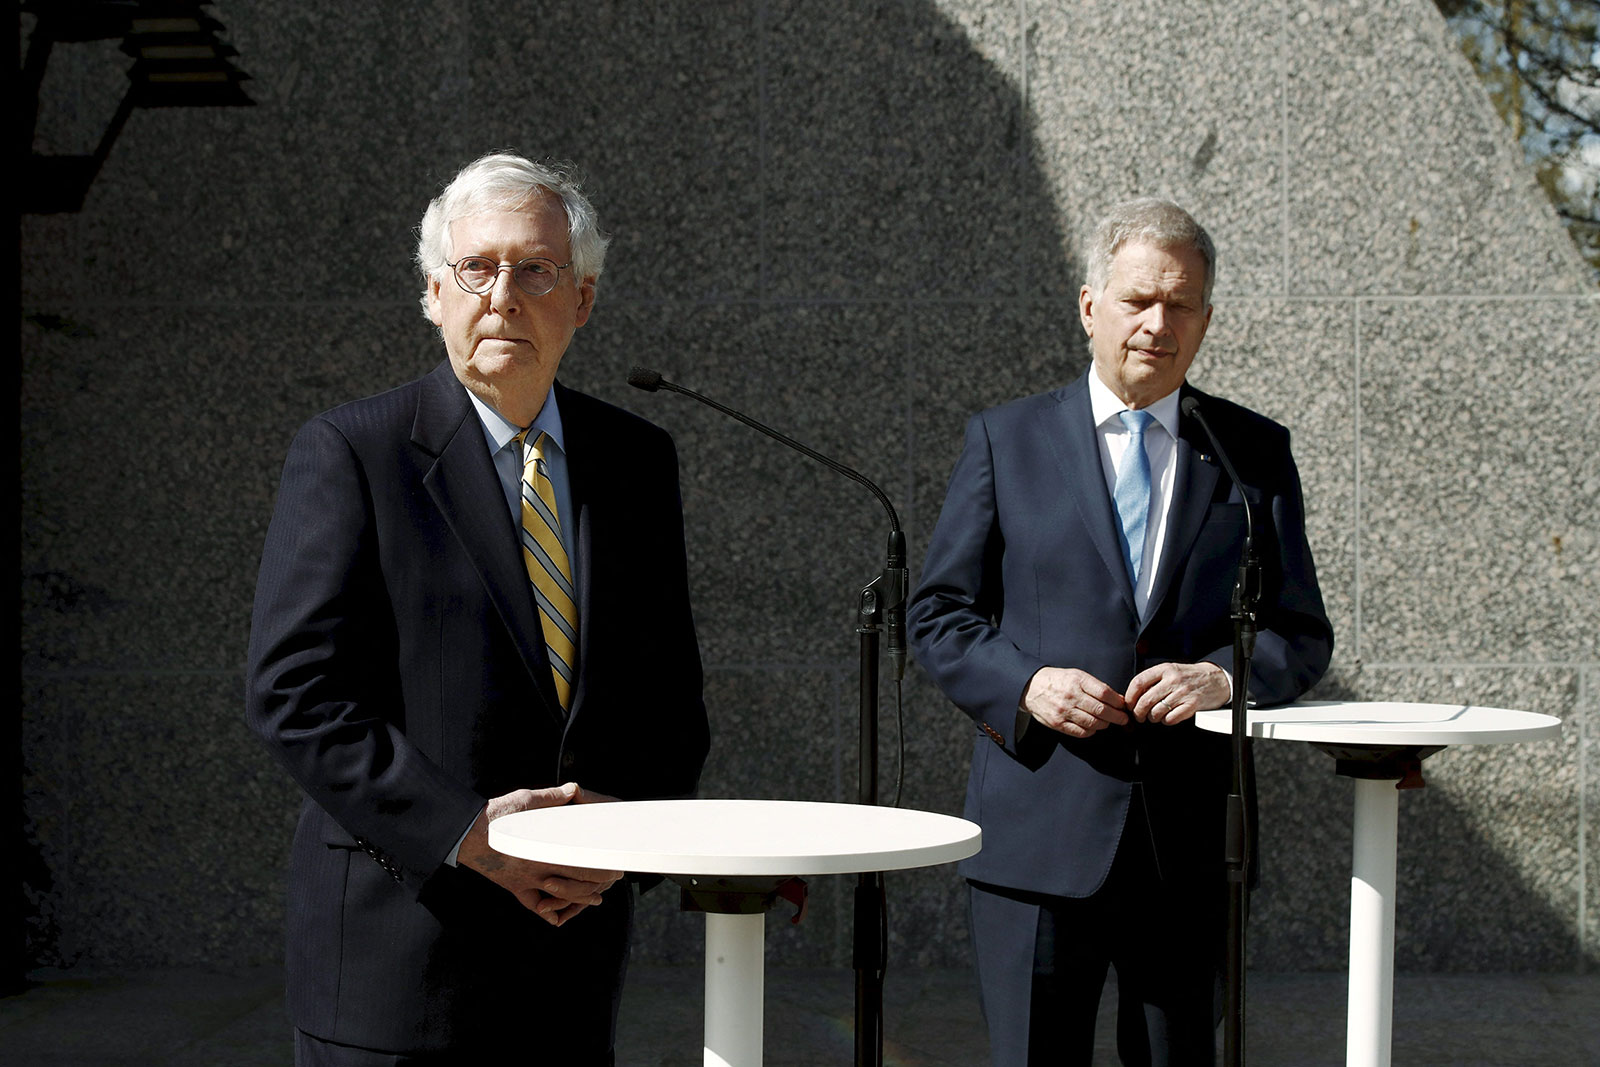 Senate Minority Leader Mitch McConnell and Finland's President Sauli Niinistö speak to the press after their meeting in Helsinki on Monday.